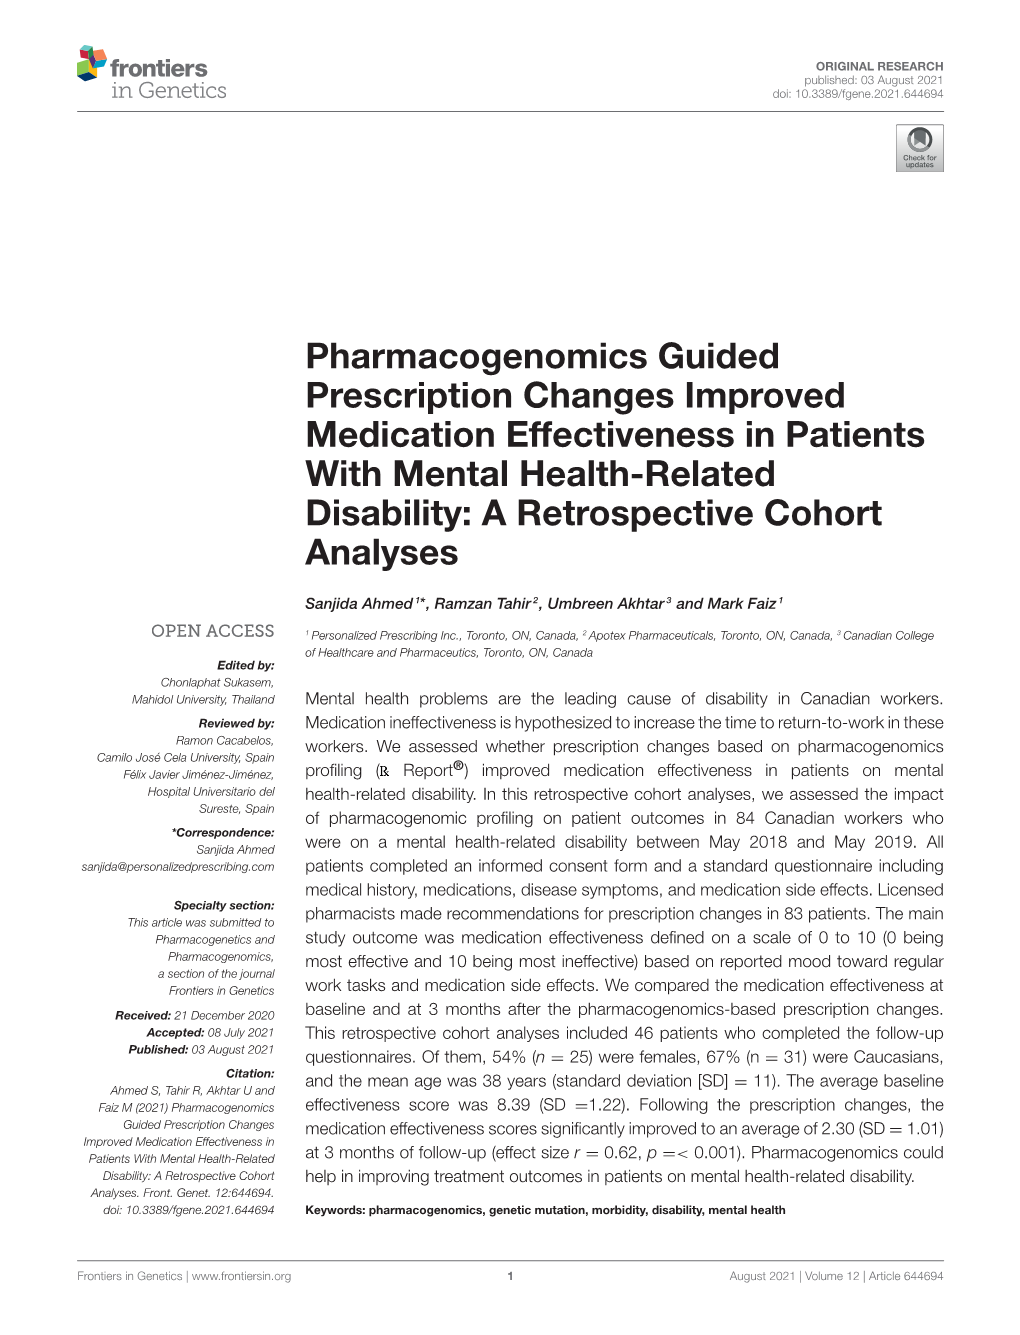 Pharmacogenomics Guided Prescription Changes Improved Medication Effectiveness in Patients with Mental Health-Related Disability: a Retrospective Cohort Analyses